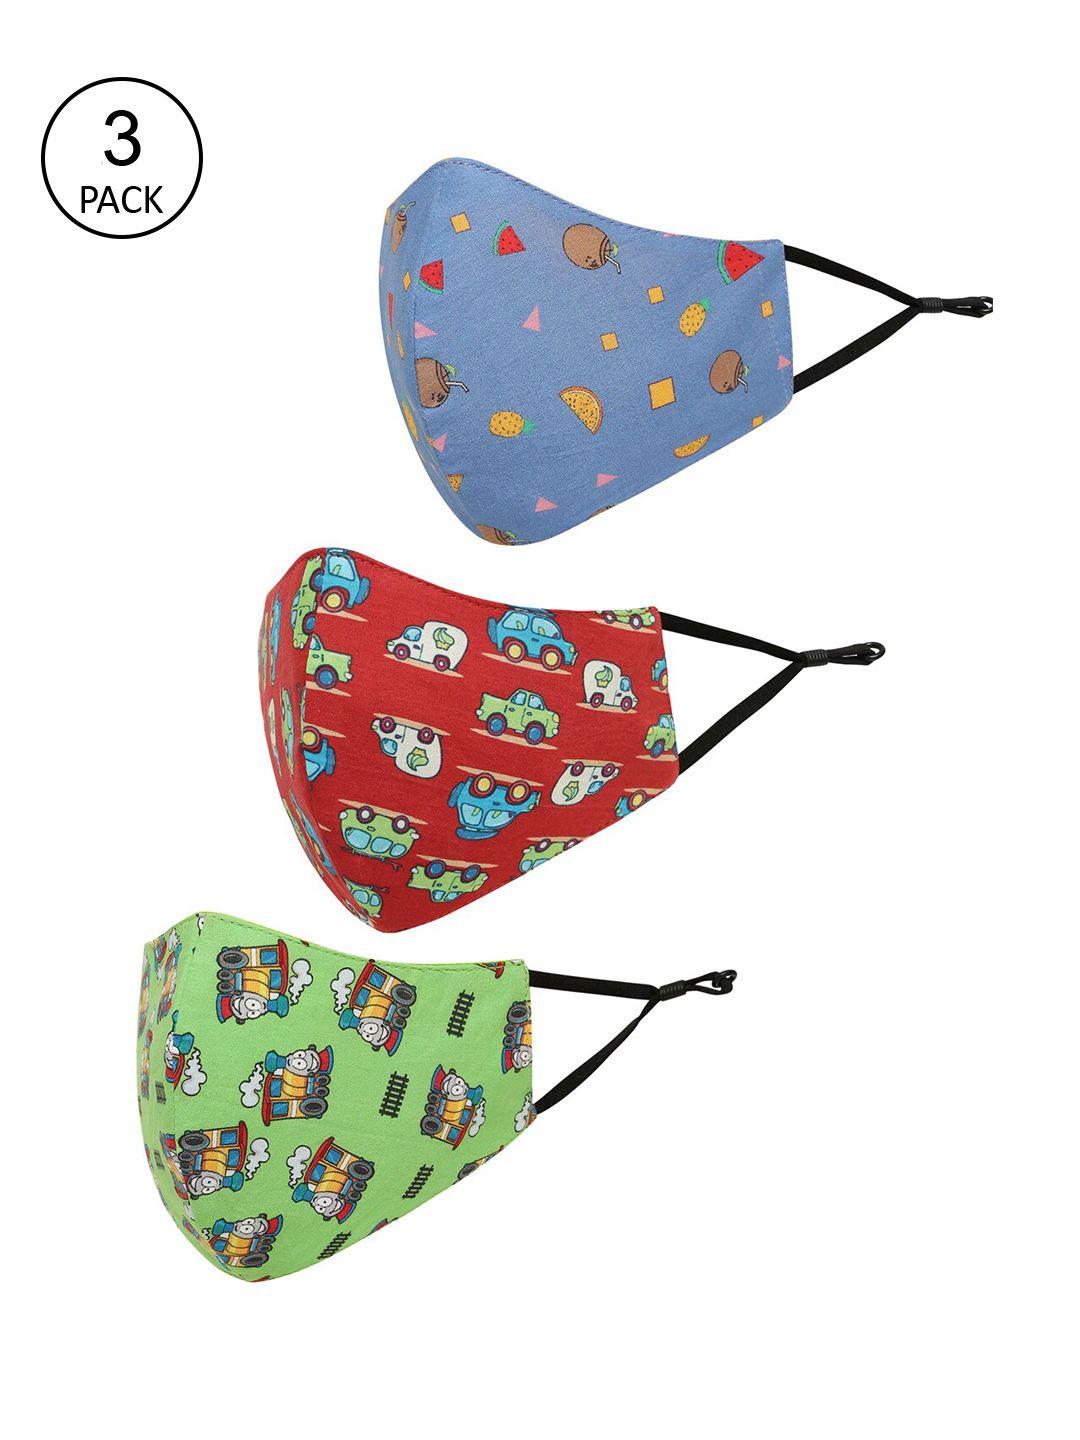 tossido kids pack of 3 red printed pure cotton 3-ply reusable outdoor cotton cloth masks